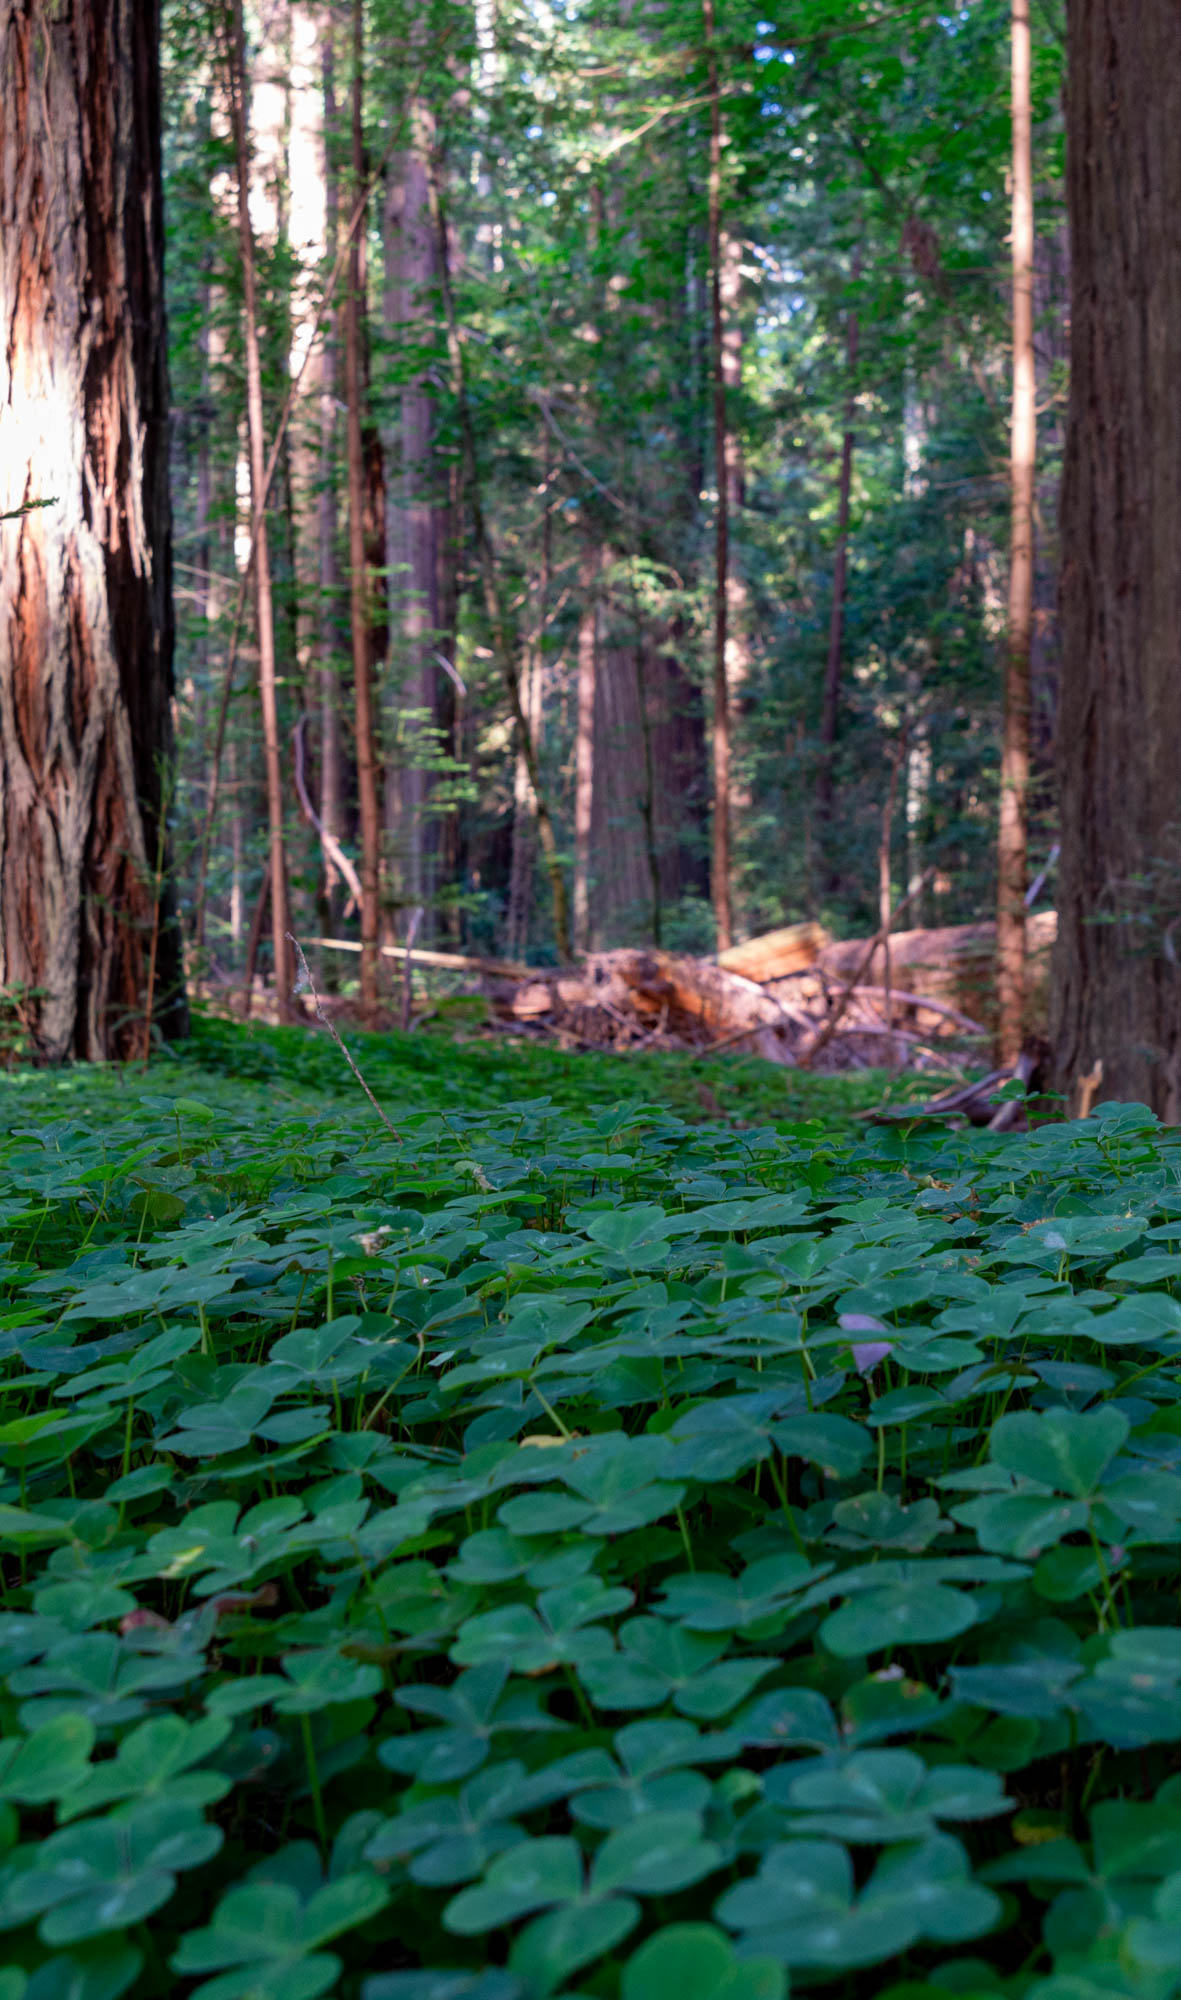 A forest floor, showing redwood sorrel in the foreground and trees in the background